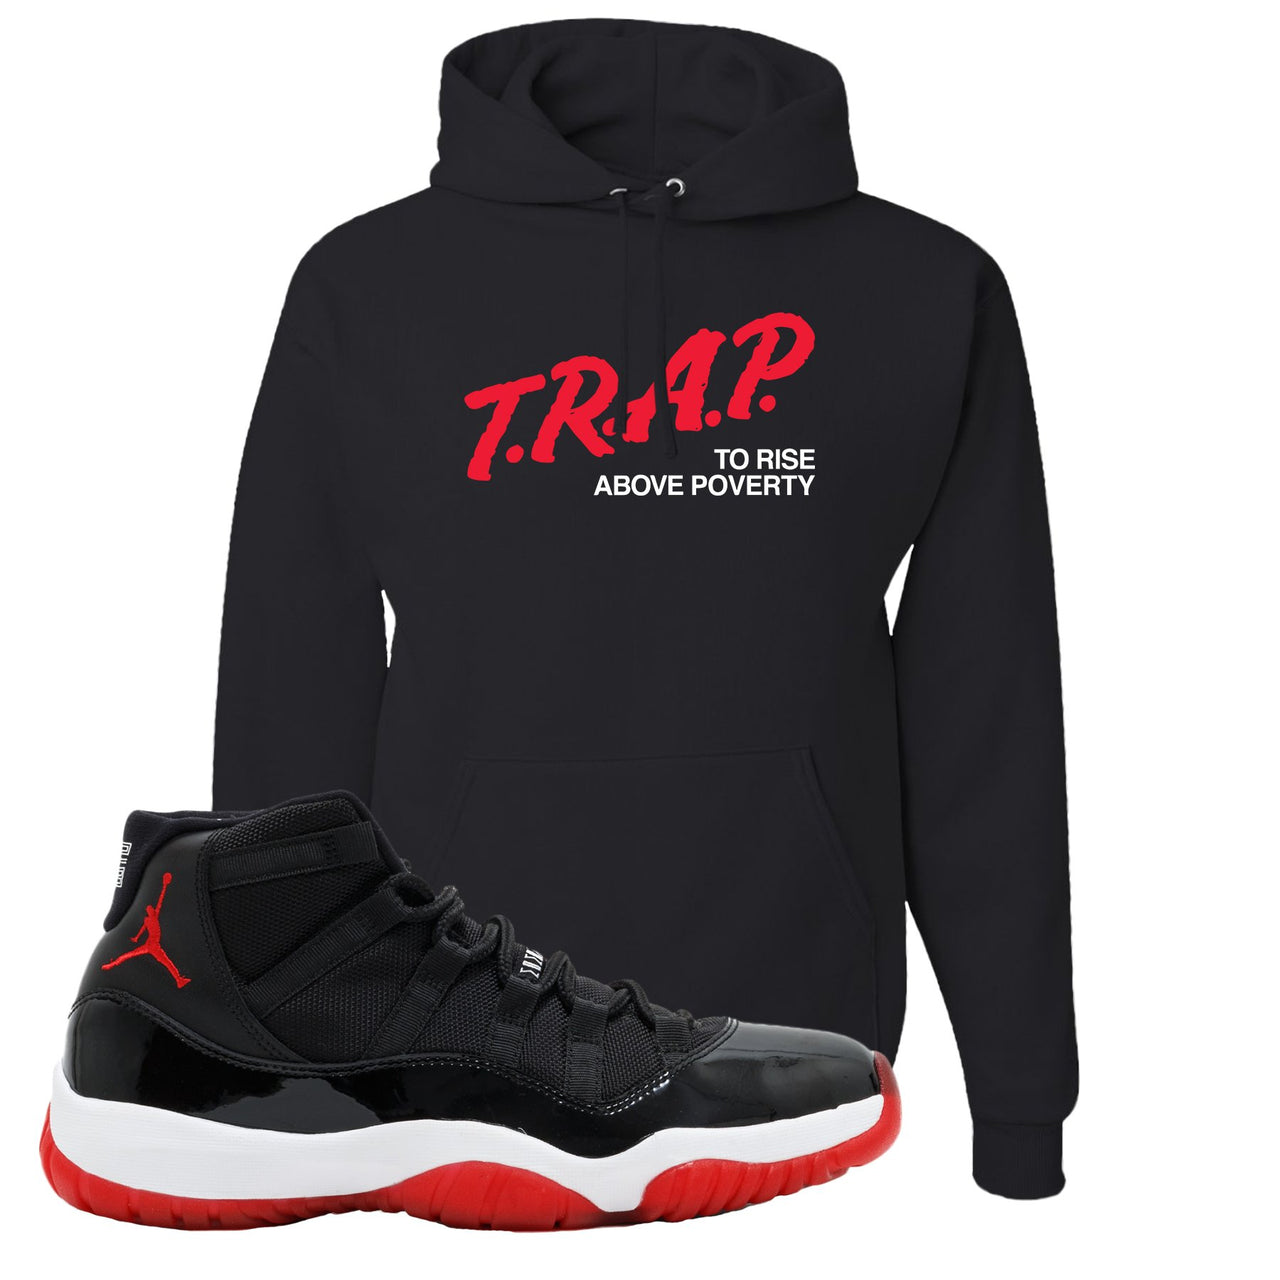 Jordan 11 Bred Trap To Rise Above Poverty Black Sneaker Hook Up Pullover Hoodie